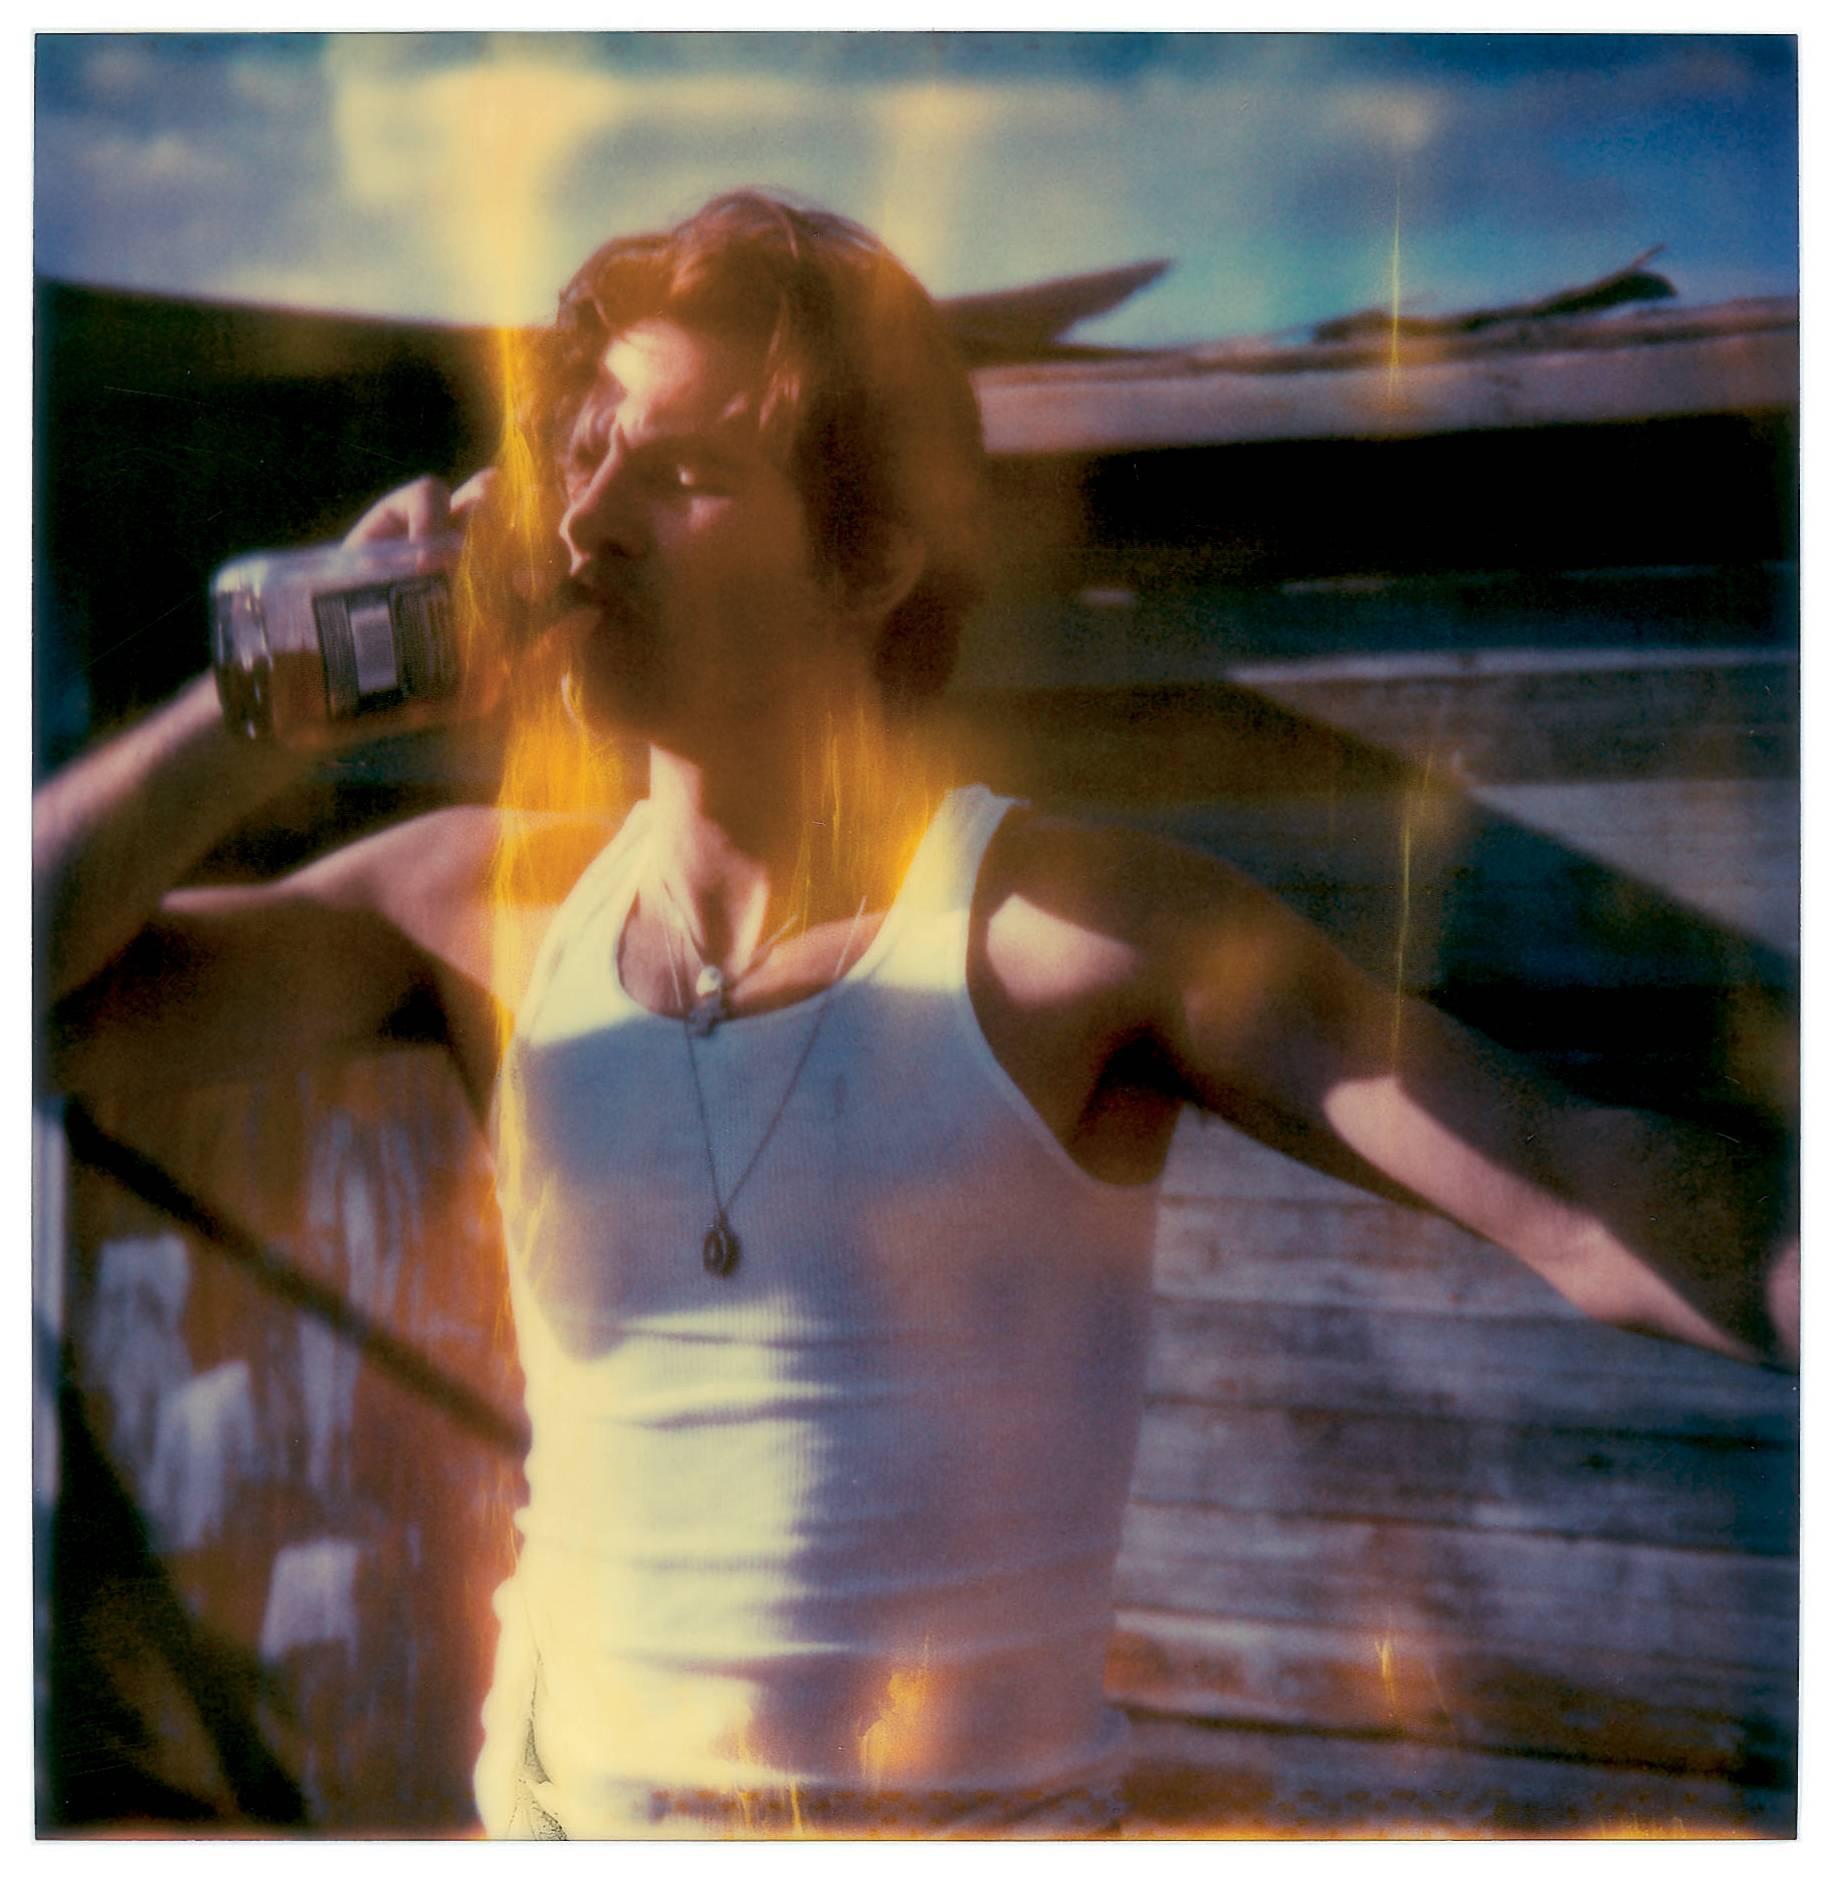 'Whisky Dance' (Sidewinder), 2005, 8 pieces installed including gaps 172x338cm, 82x80cm, 
Edition 1/5, 
analog C-Prints, hand-printed by the artist on Fuji Crystal Archive Paper, 
mounted on Aluminum with matte UV-Protection, based on 8 Polaroids,